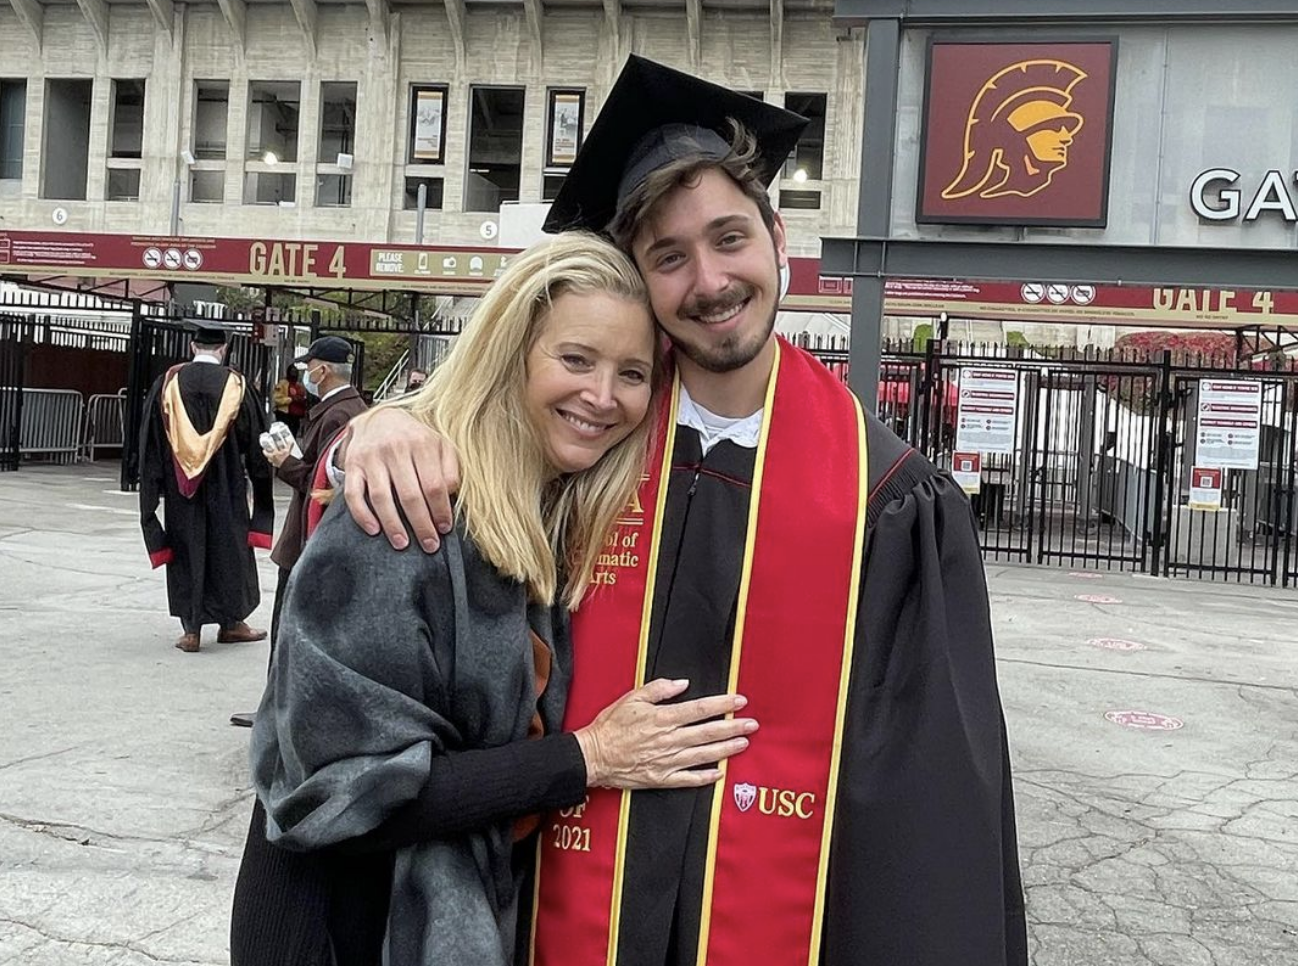 <p><span>Proud mom Lisa Kudrow shared this joyful </span><a href="https://www.instagram.com/p/CO8lObenRCr/">photo </a><span>with her only child, son Julian Stern (who was born in 1998) on his college graduation day in May 2021. Julian -- who </span><a href="https://www.instagram.com/p/CO9KIJBFhm8/"><span>earned a </span>bachelor</a> of fine arts, cinematic arts and film and television production -- <span>is following in his mom's footsteps and pursuing a career in the entertainment industry: The same month, he revealed on Instagram that his junior year thesis film, </span><a href="https://vimeo.com/375529768">"Mind Made Up,"</a><span> had been selected to compete in the Portland Comedy Film Festival.</span></p>